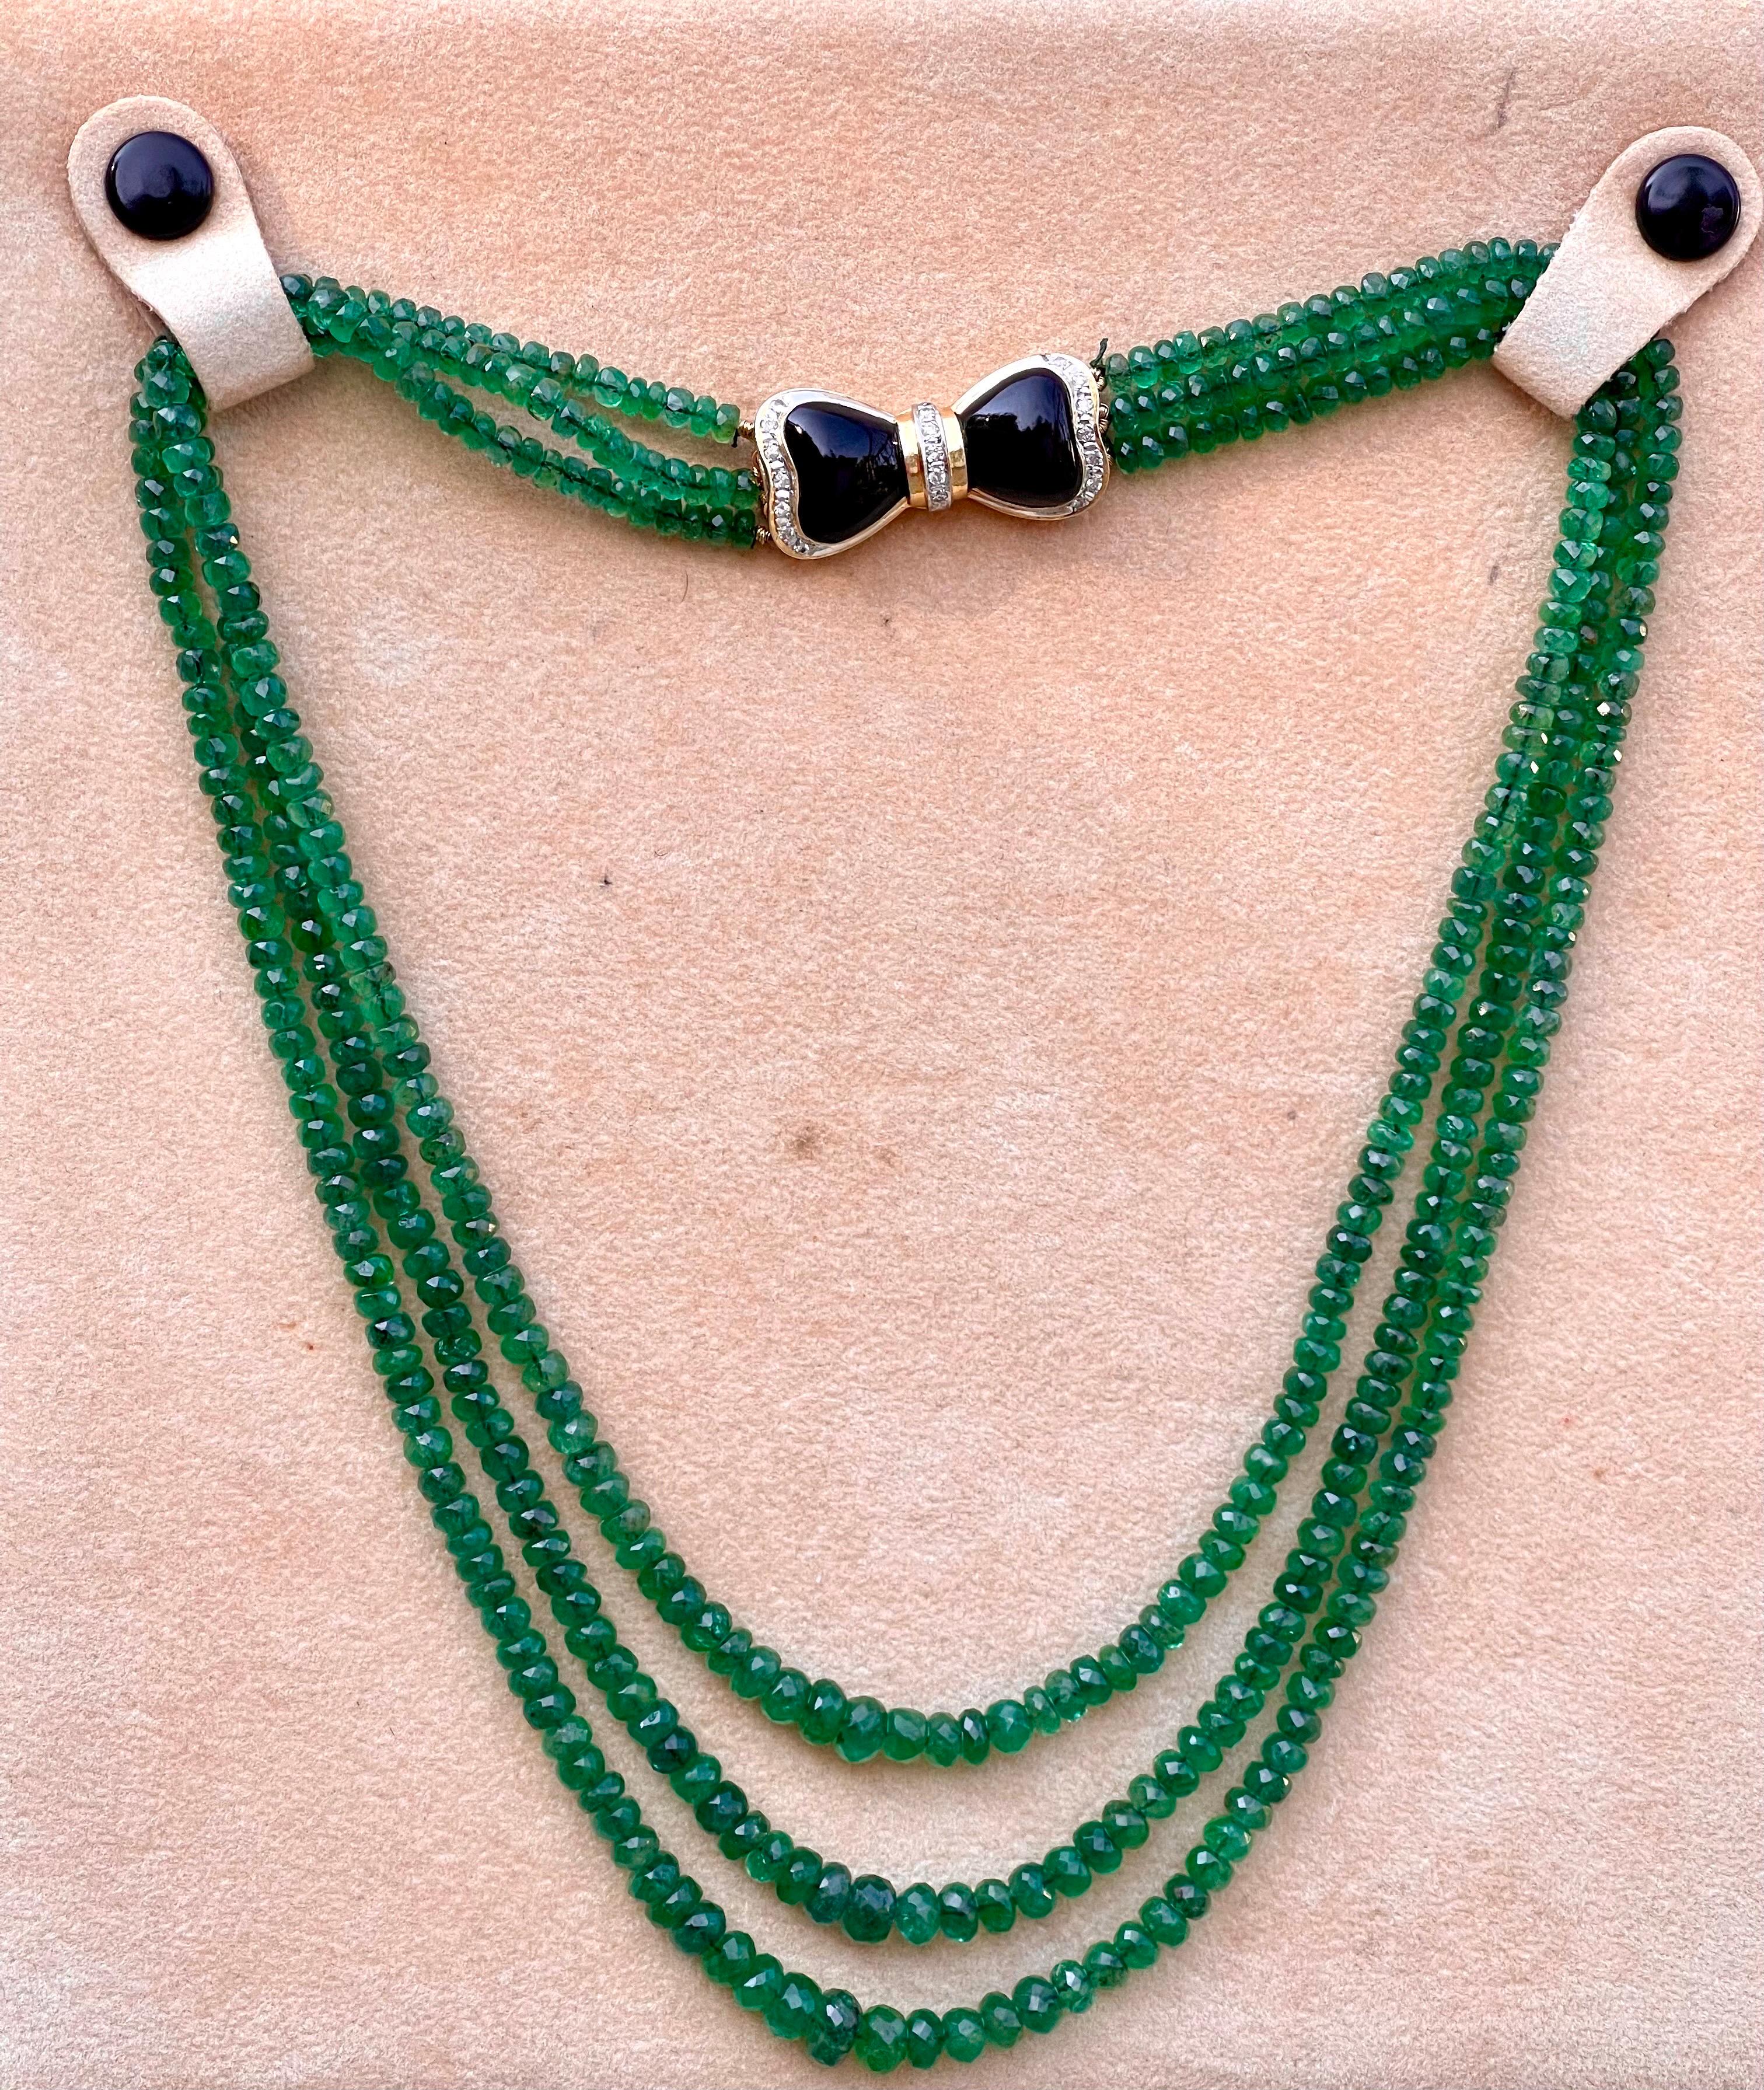 Approximately 240 Ct Fine Natural Emerald Beads 3 Line Necklace with Black Onyx and Diamond  14 Karat Yellow Gold   Clasp
This spectacular Necklace   consisting of approximately 240 Ct  of fine beads.
The shine sparkle and brilliance with deep green